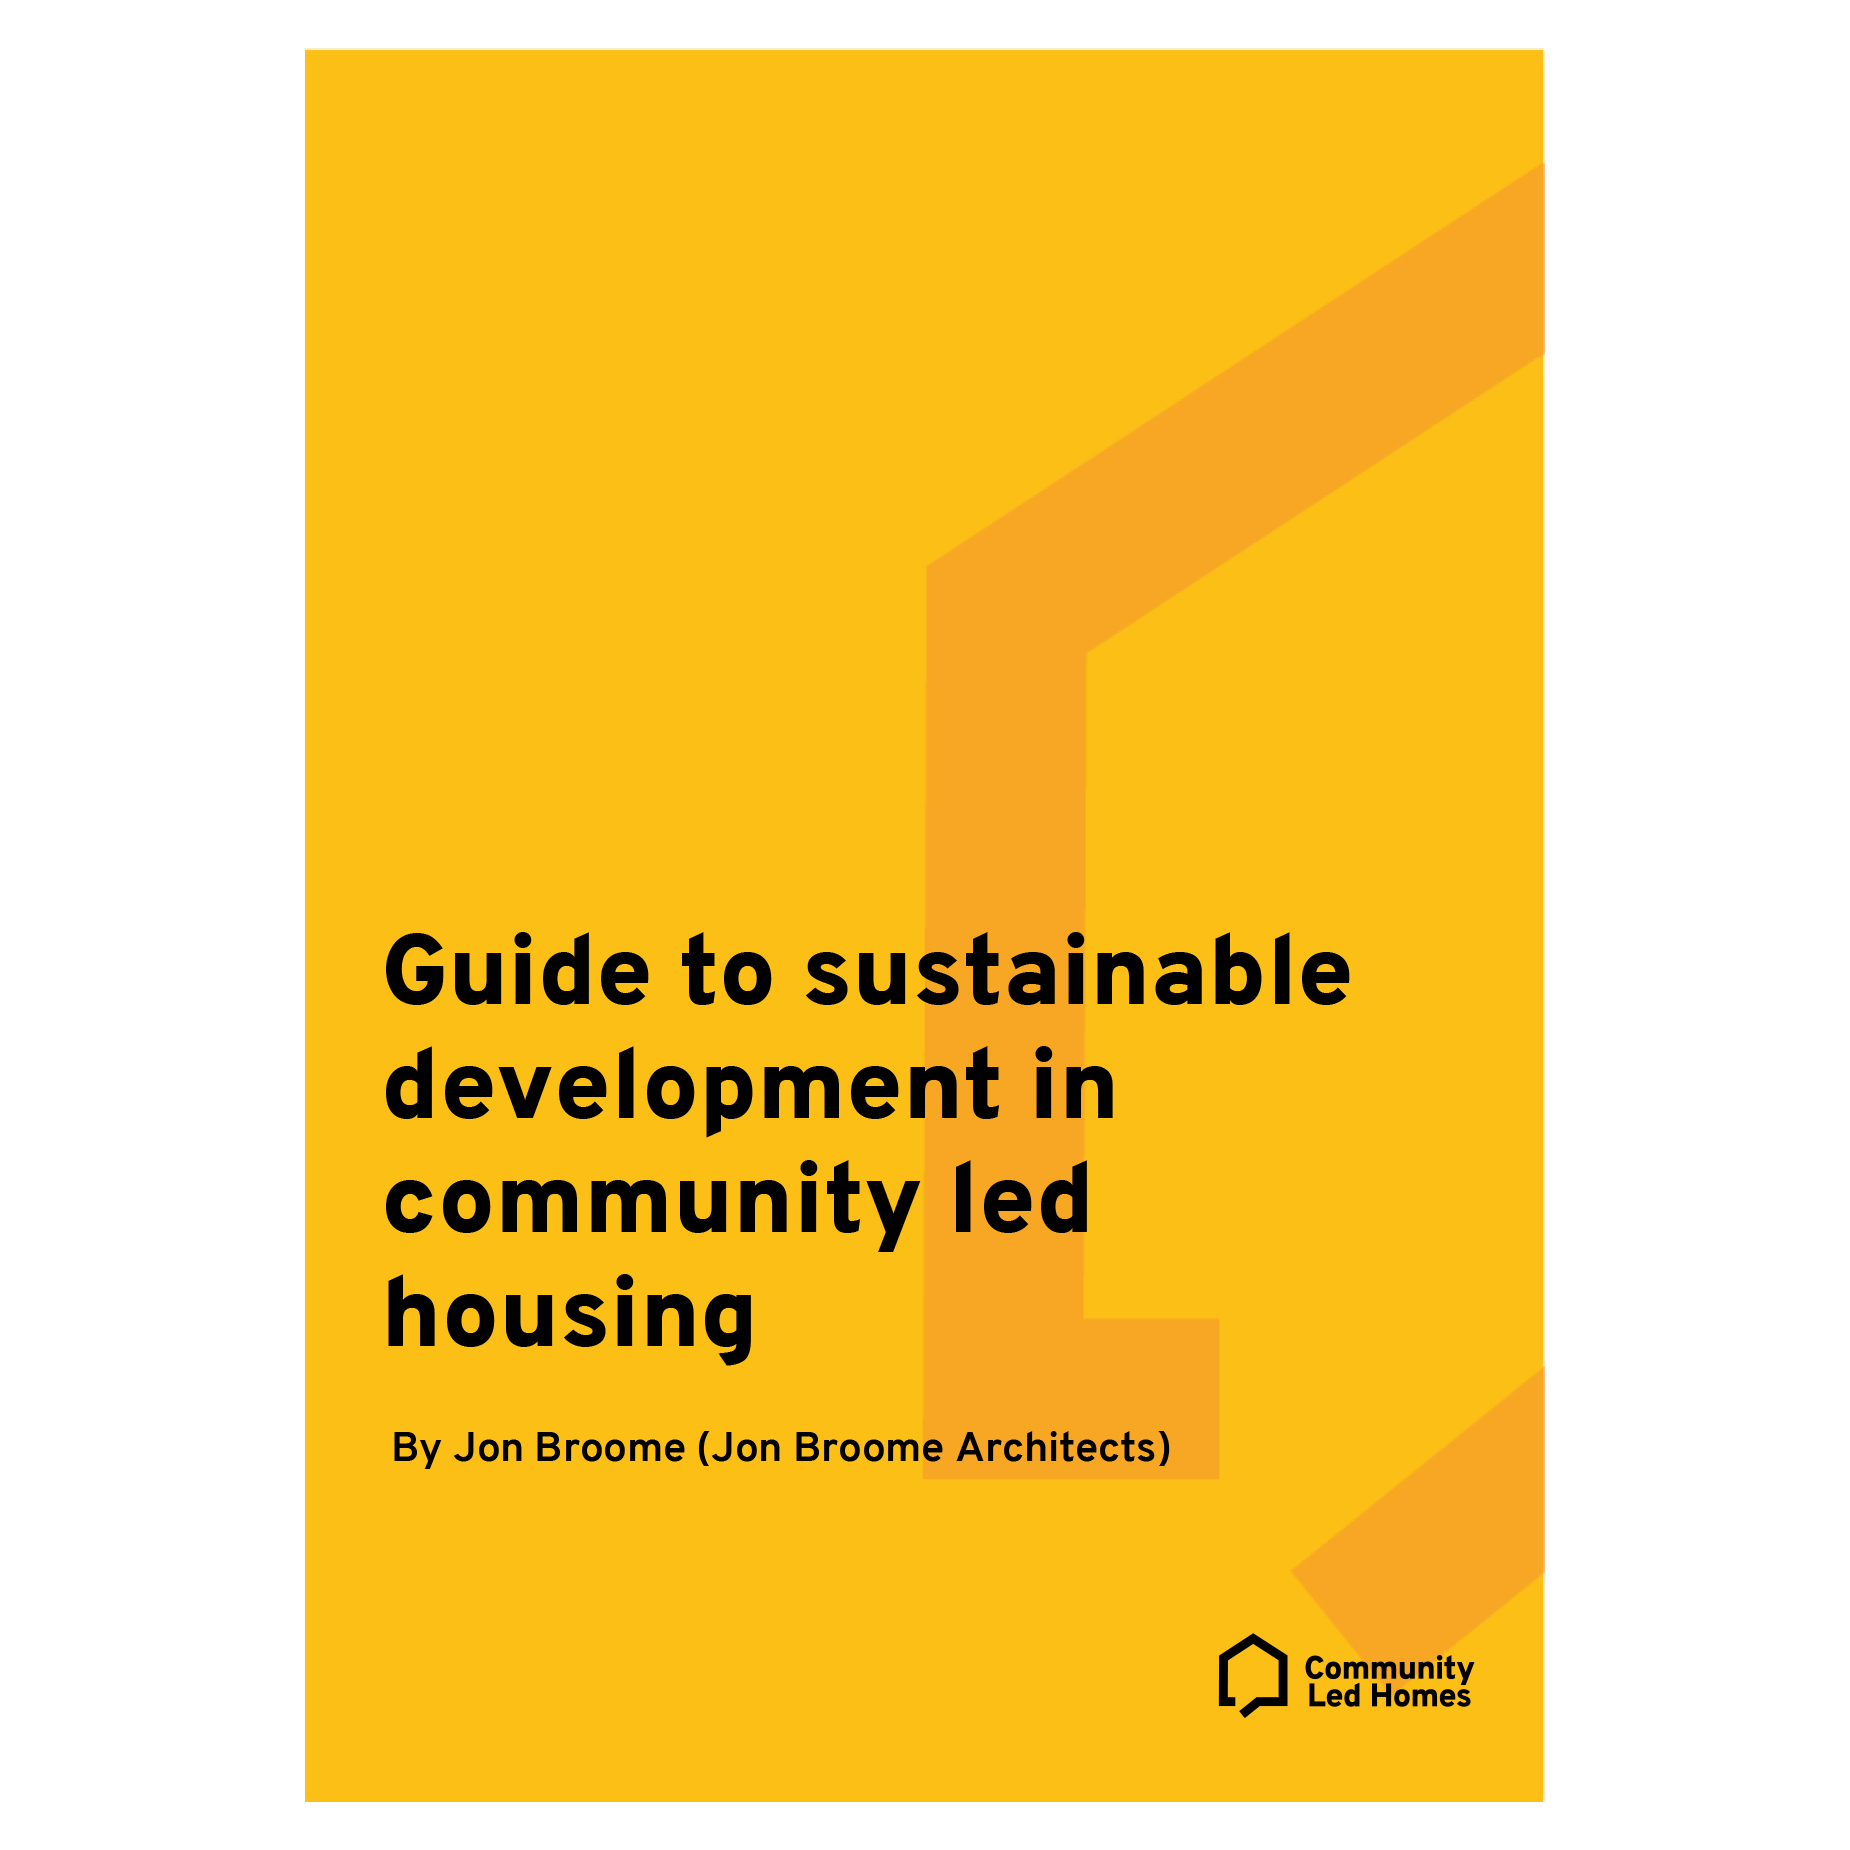 Guide to sustainable development in community led housing